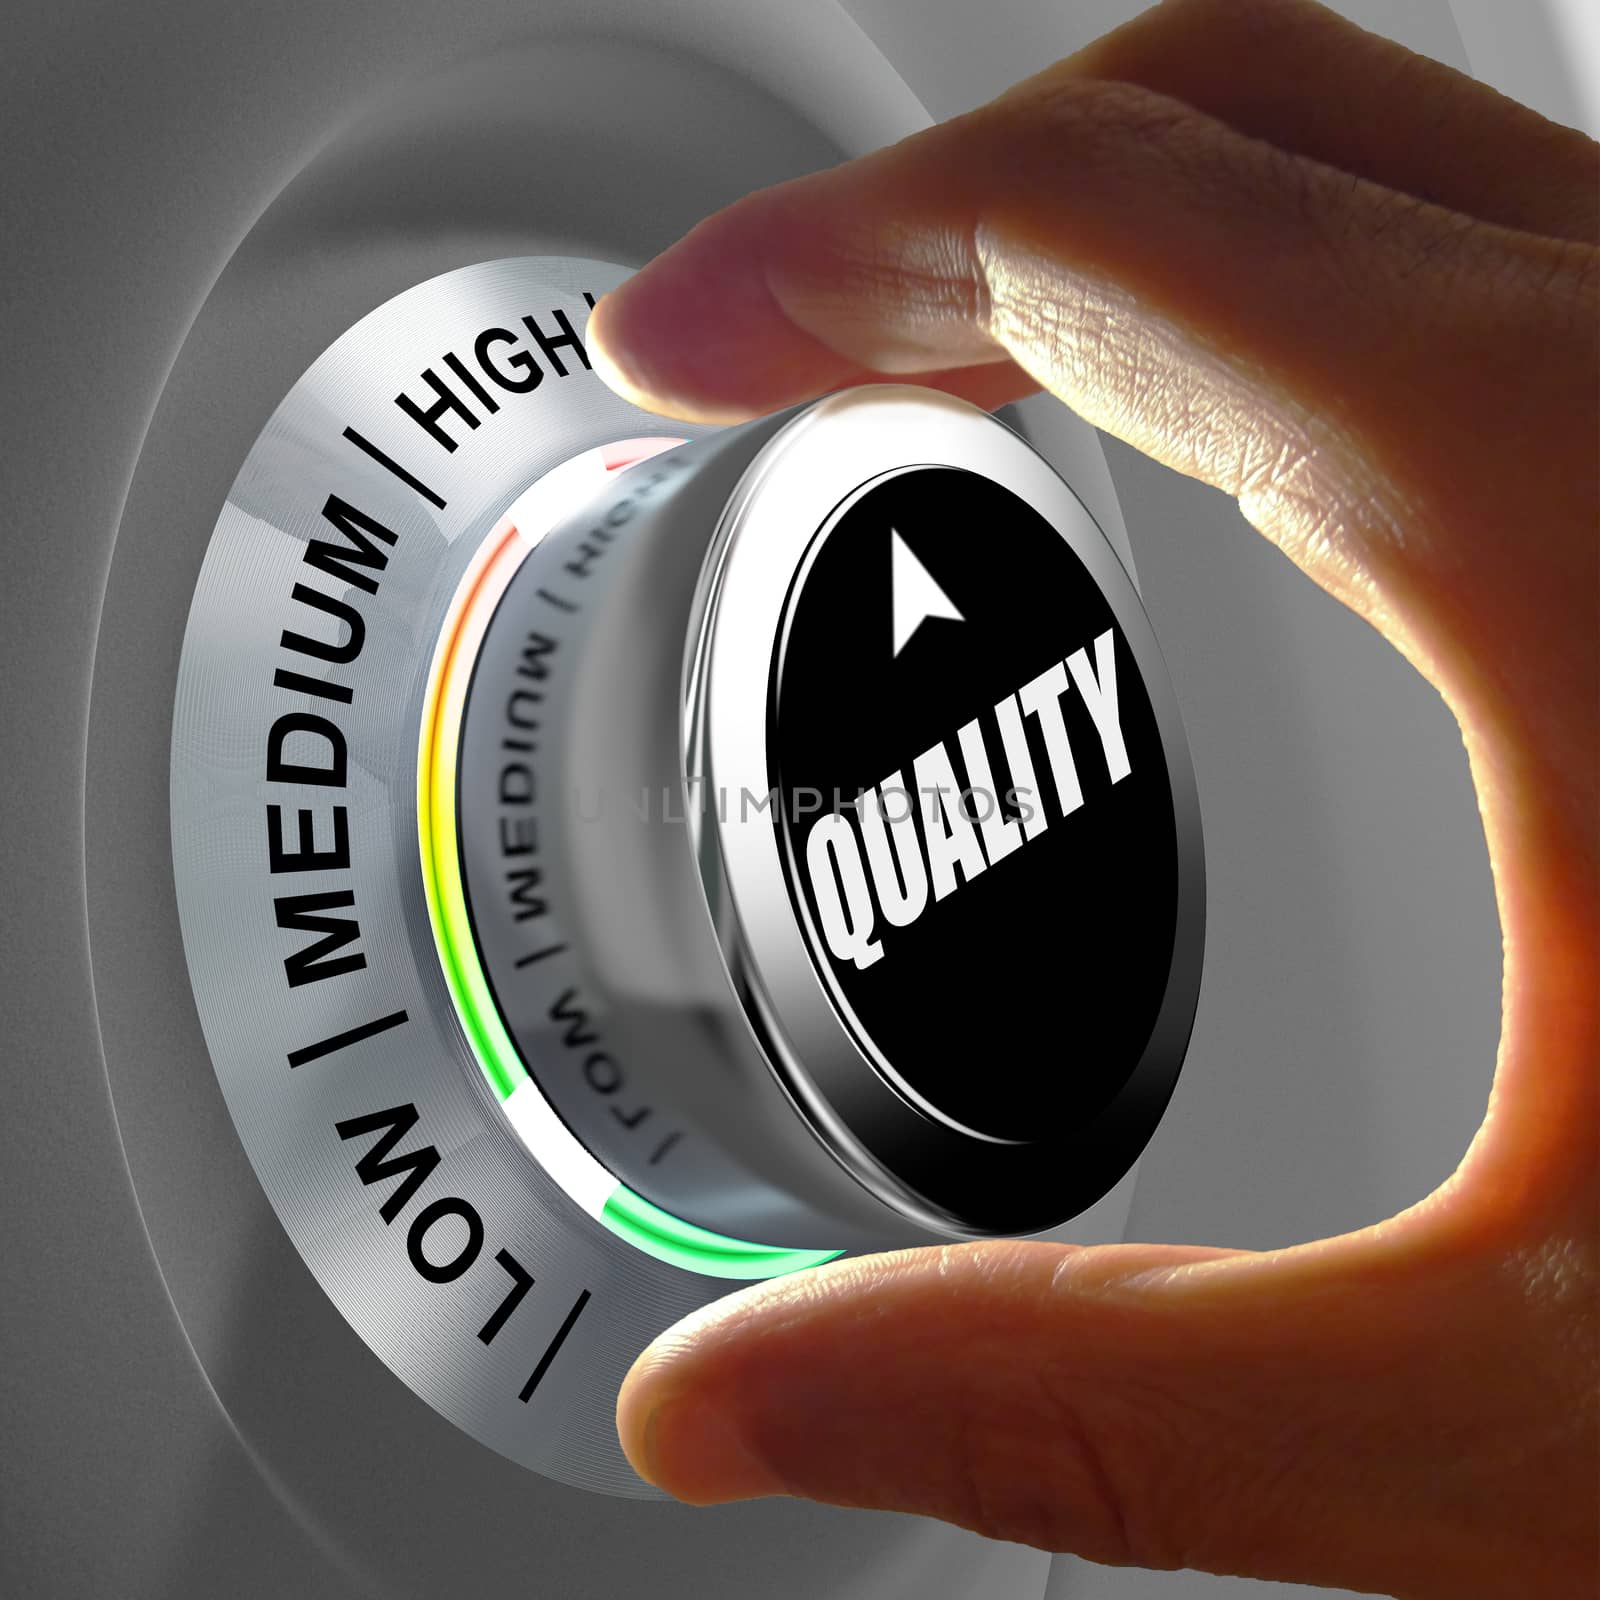 Hand rotating a button and selecting the level of quality. This concept illustration is a metaphor for choosing the level of quality. Three levels are available: low, medium and high.